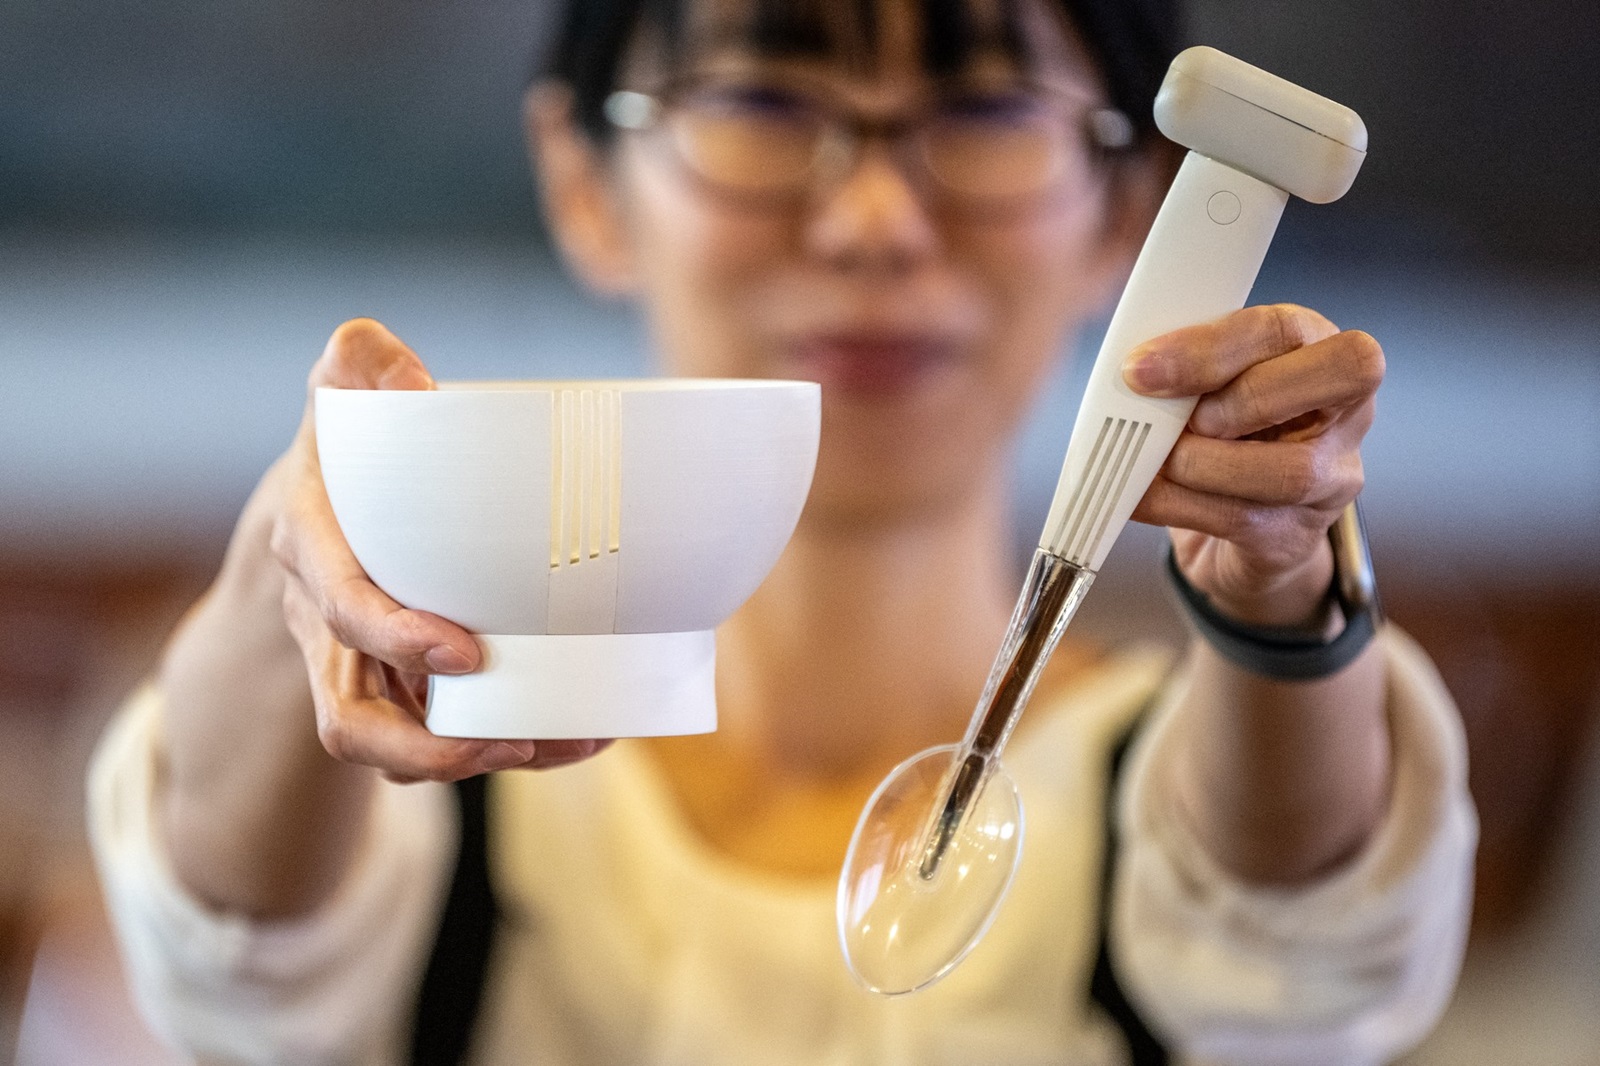 This picture taken on November 20, 2023 shows Ai Sato, from the health science business division of Kirin Holdings, displaying a spoon and bowl that enhance the salty taste of low-sodium food, at the city hall in Odawara, Kanagawa prefecture, south of Tokyo. The spoons and bowls were developed to help people who are trying to reduce salt intake, yet still enjoy traditionally salty dishes like ramen noodles and Japanese miso soup.,Image: 848971278, License: Rights-managed, Restrictions: , Model Release: no, Credit line: Philip FONG / AFP / Profimedia